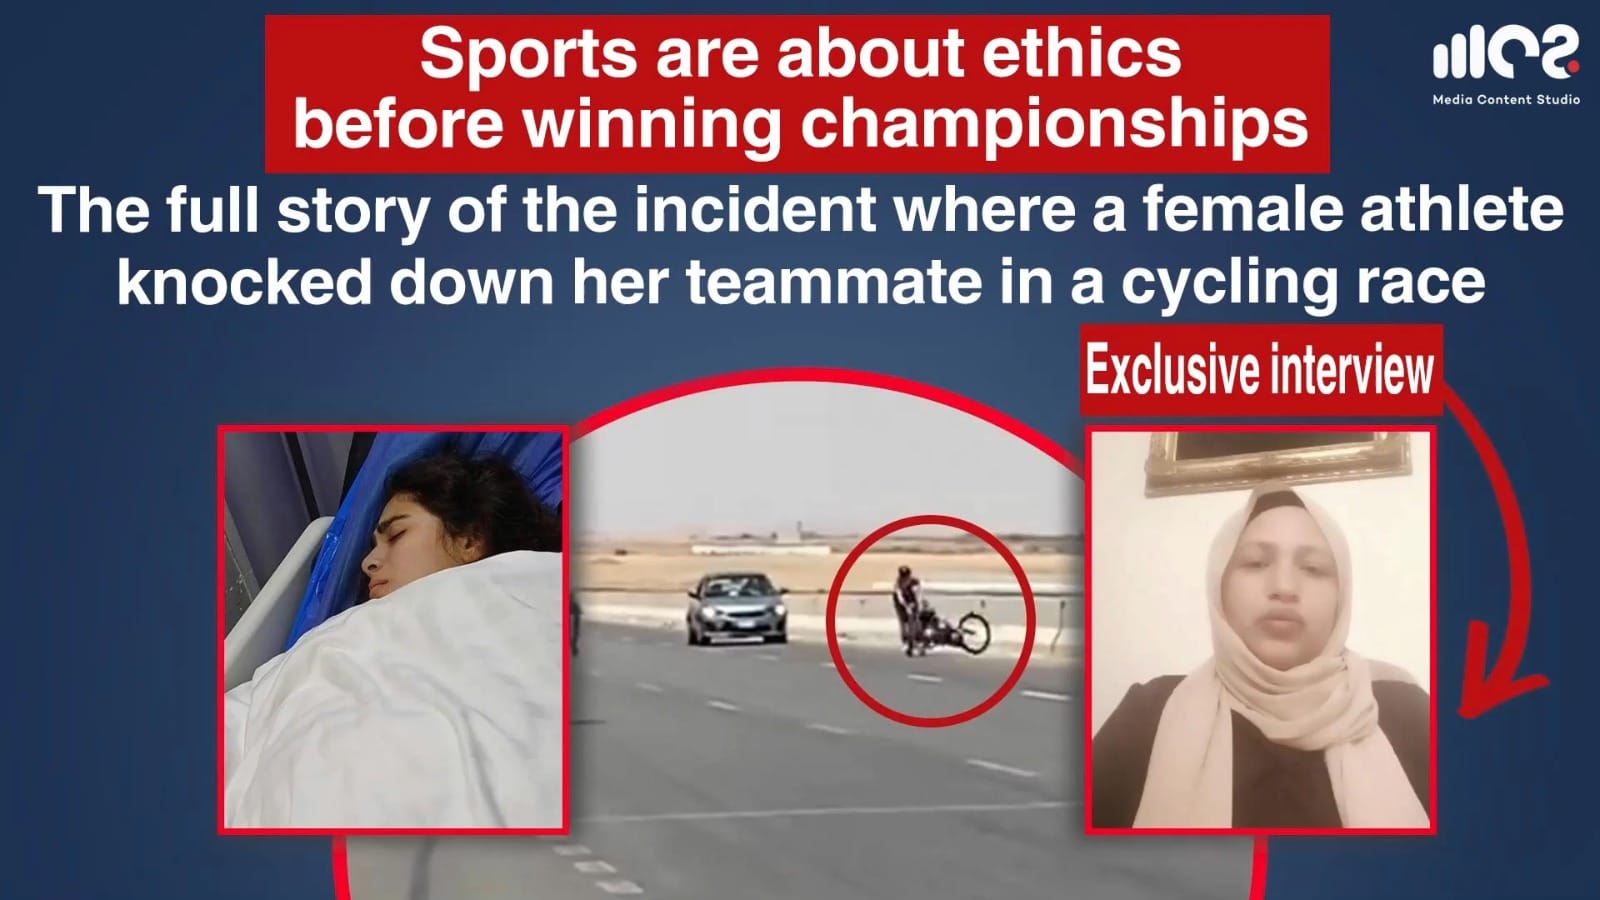 The full story of the incident where a female athlete knocked down her teammate in a cycling race